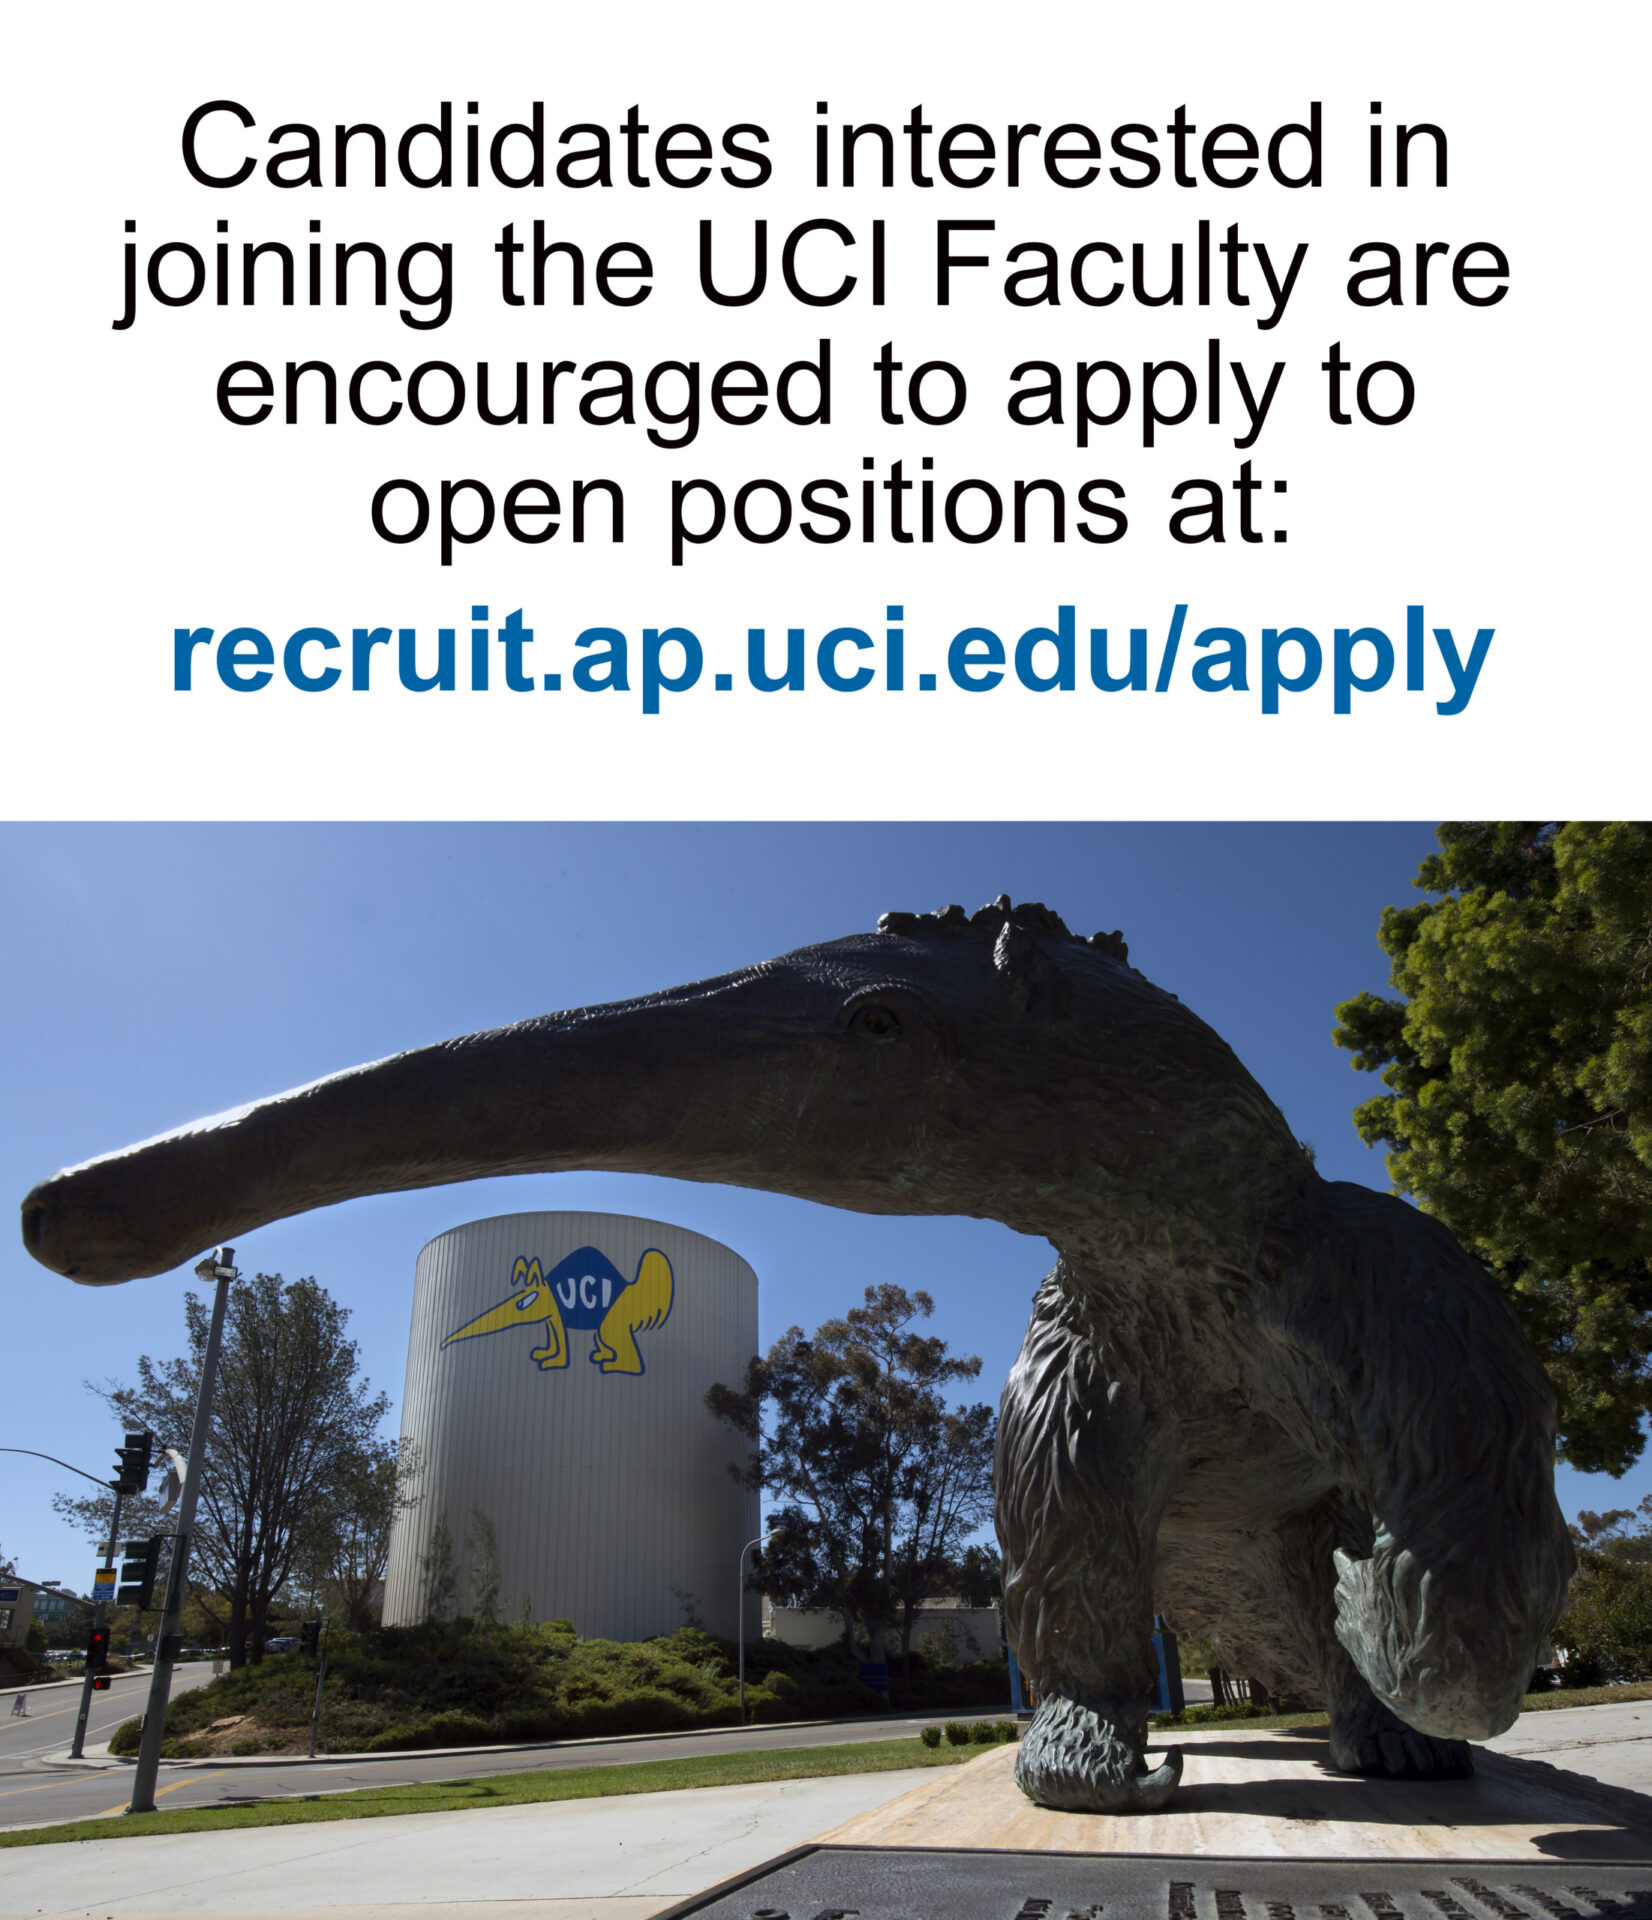 anteater - apply to uci faculty open positions